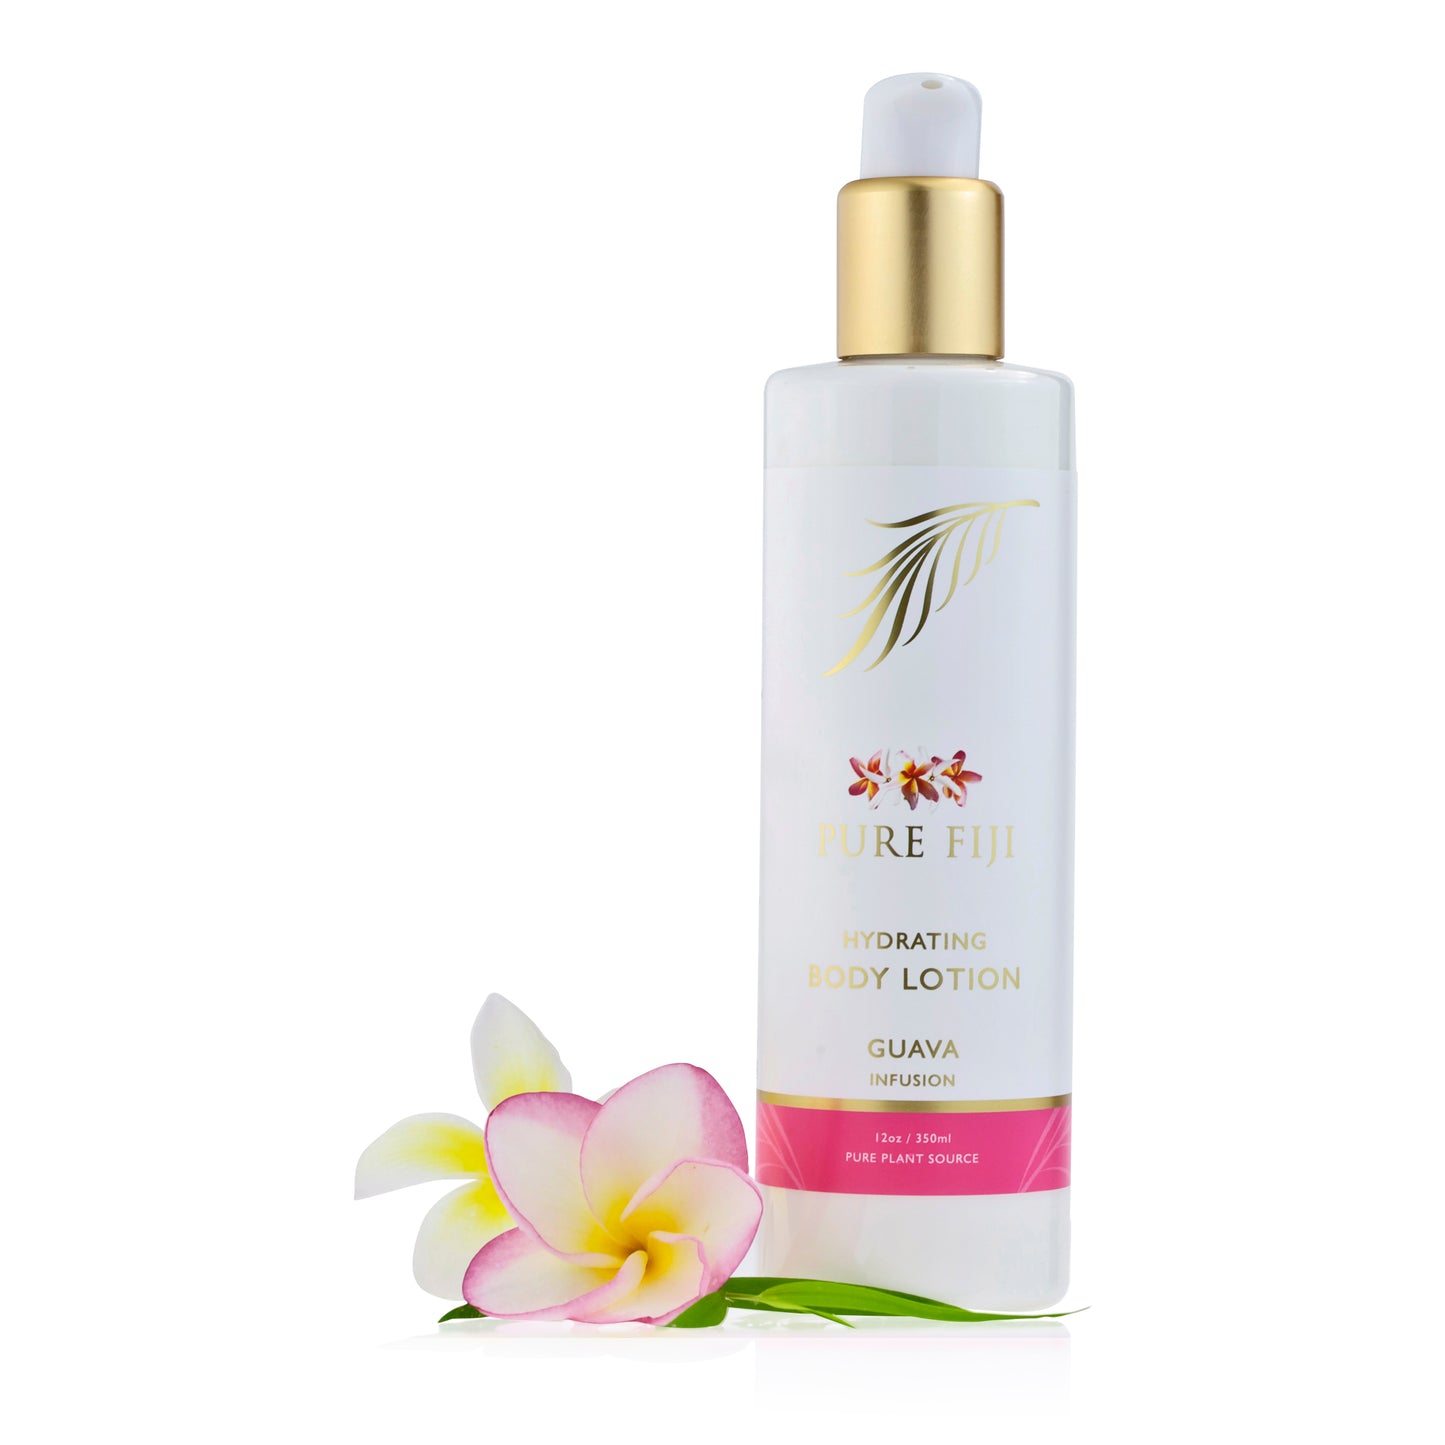 Hydrating Body Lotion - Guava